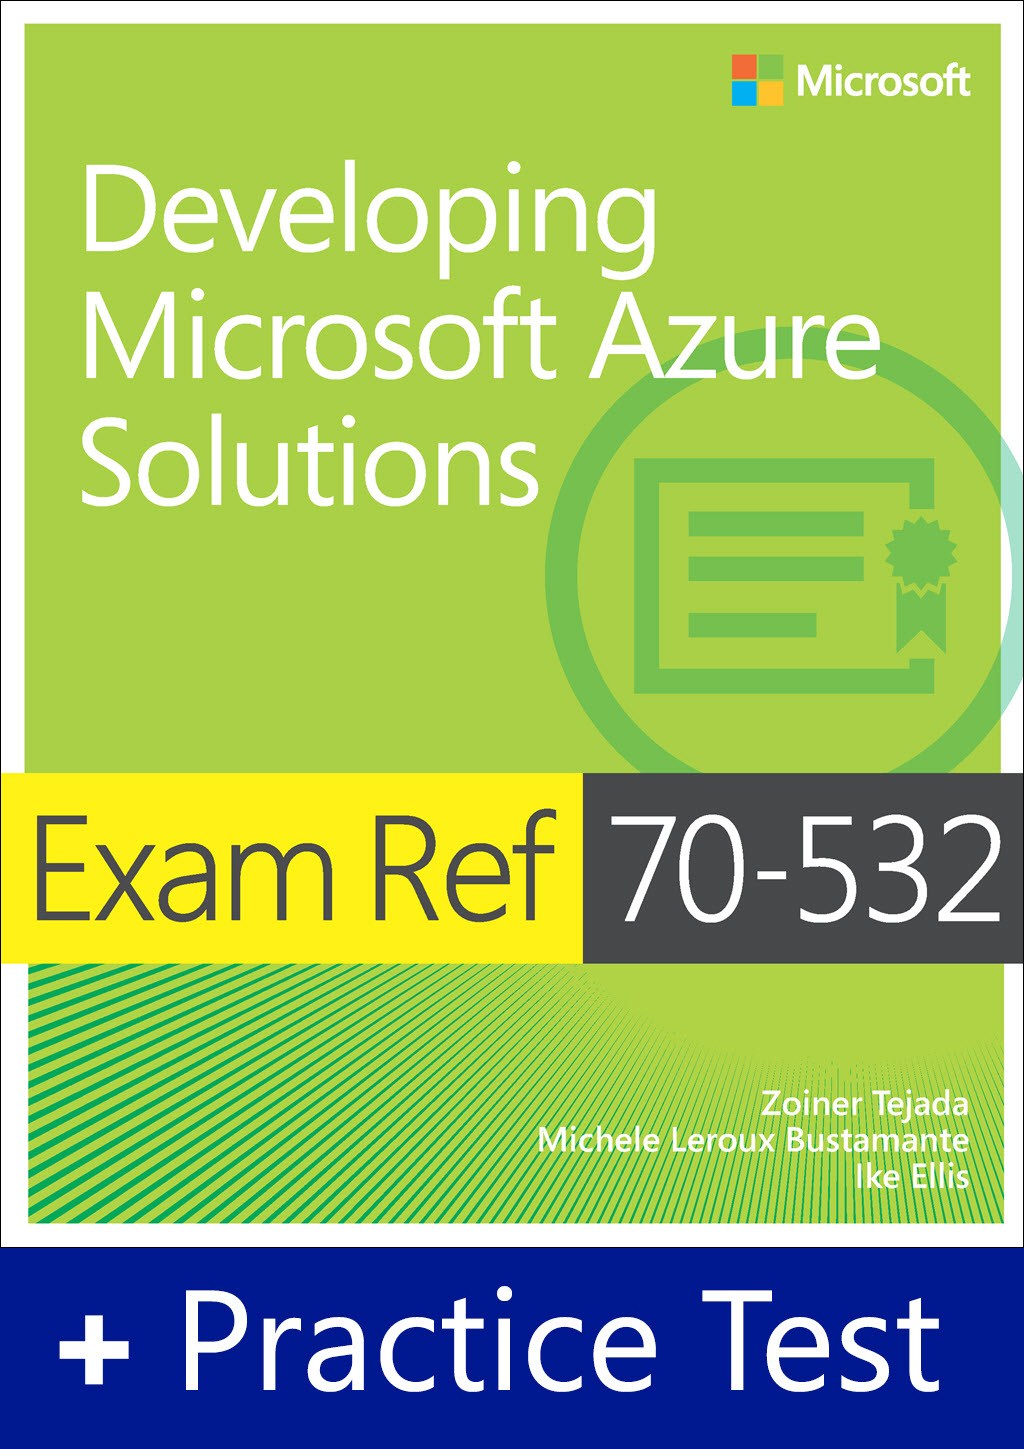 Exam Ref 70-532 Developing Microsoft Azure Solutions with Practice Test